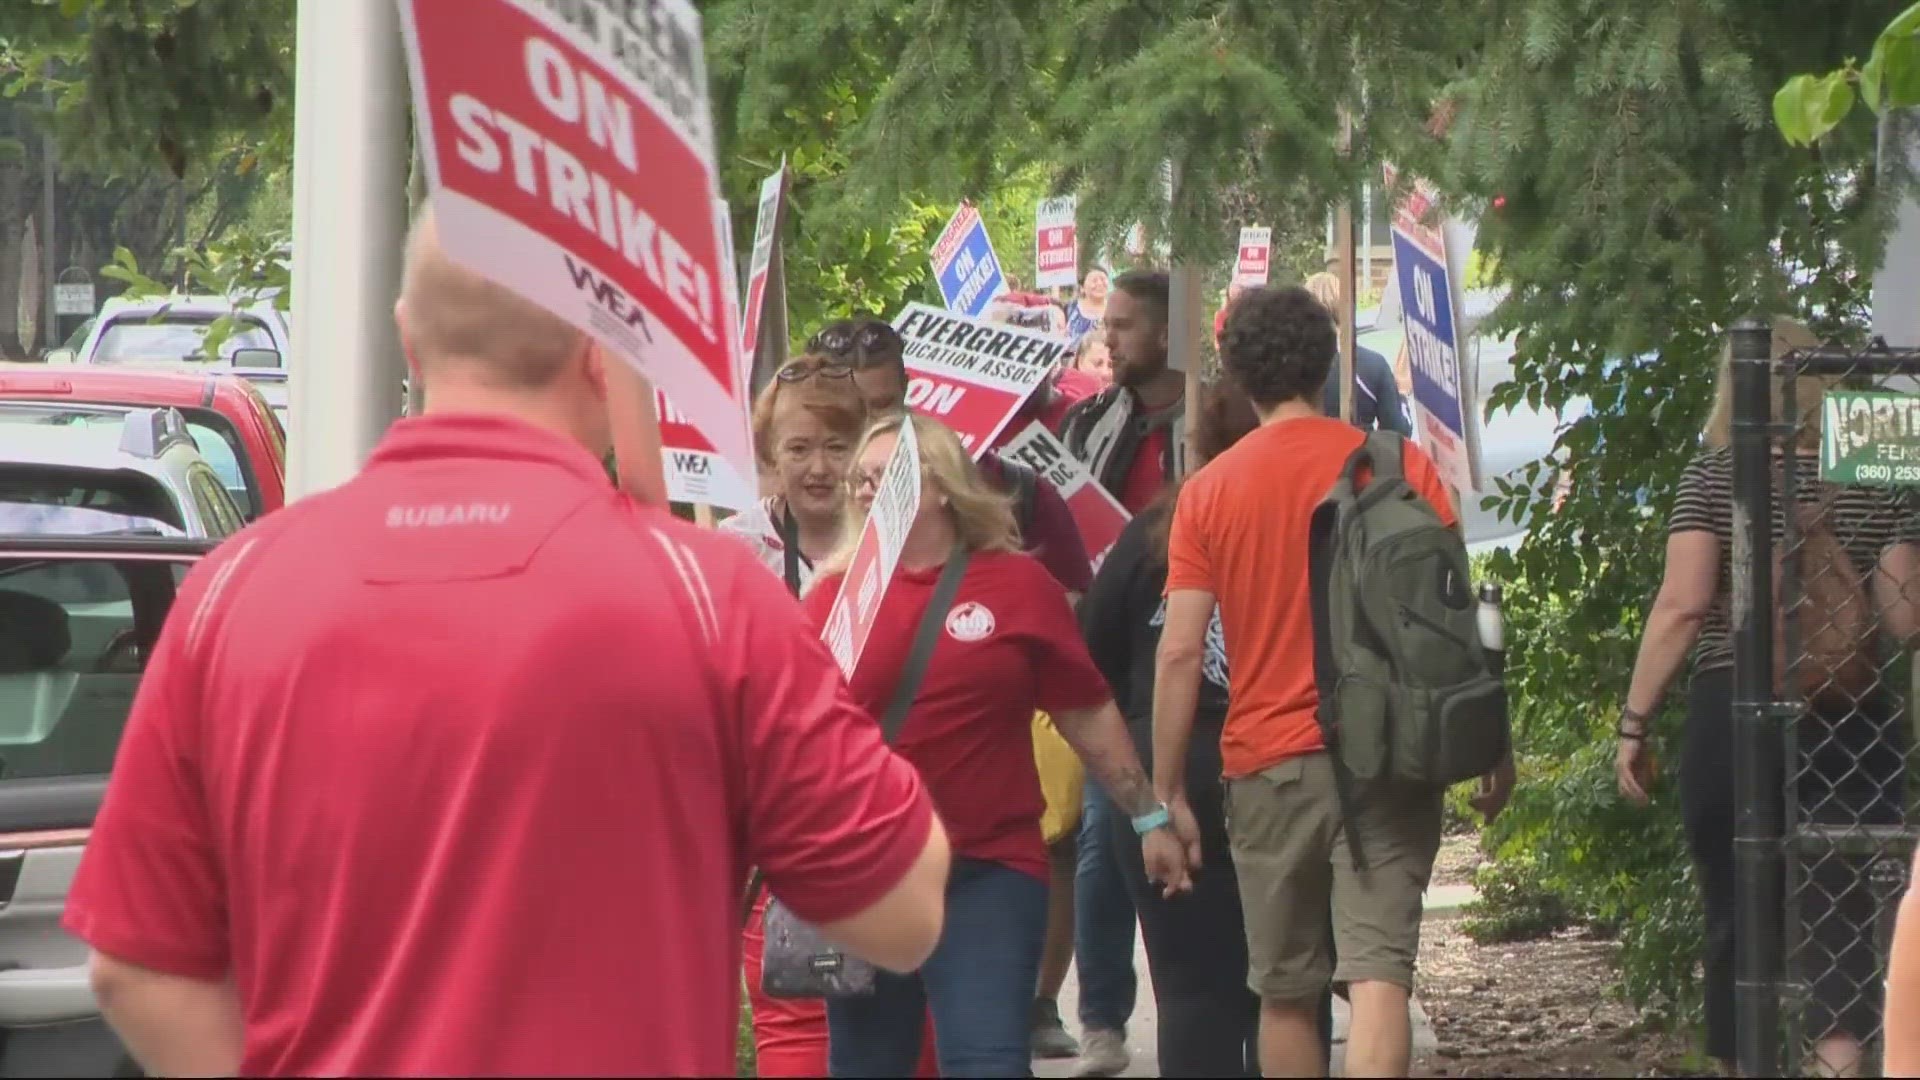 Battle Ground Public Schools said classes will start Wednesday as planned, despite ongoing contract bargaining. Camas teachers also went on strike Monday.